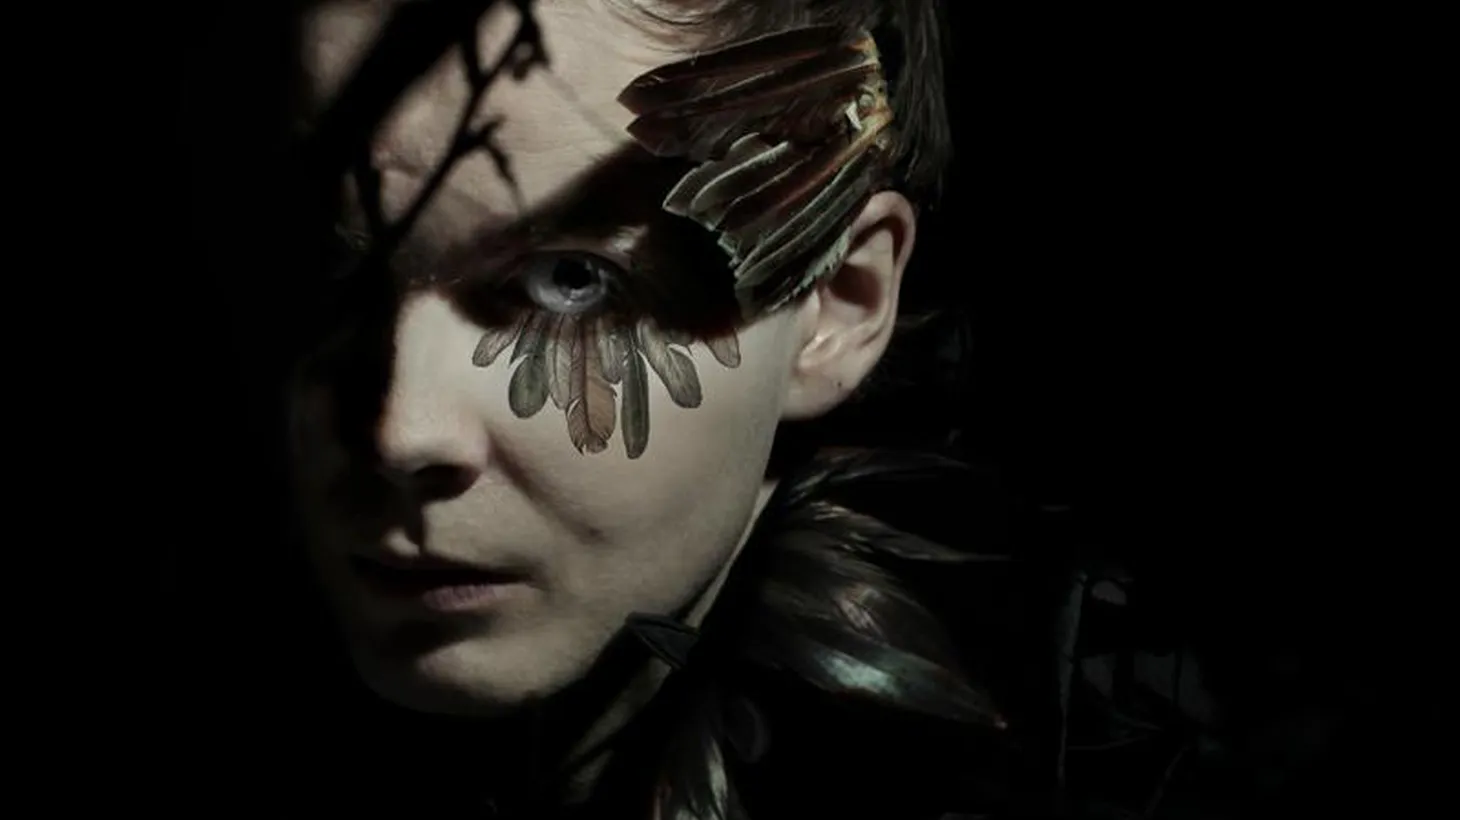 Sigur Ros frontman Jonsi brings the joyful sound of his solo project to Morning Becomes Eclectic listeners at 11:15am.